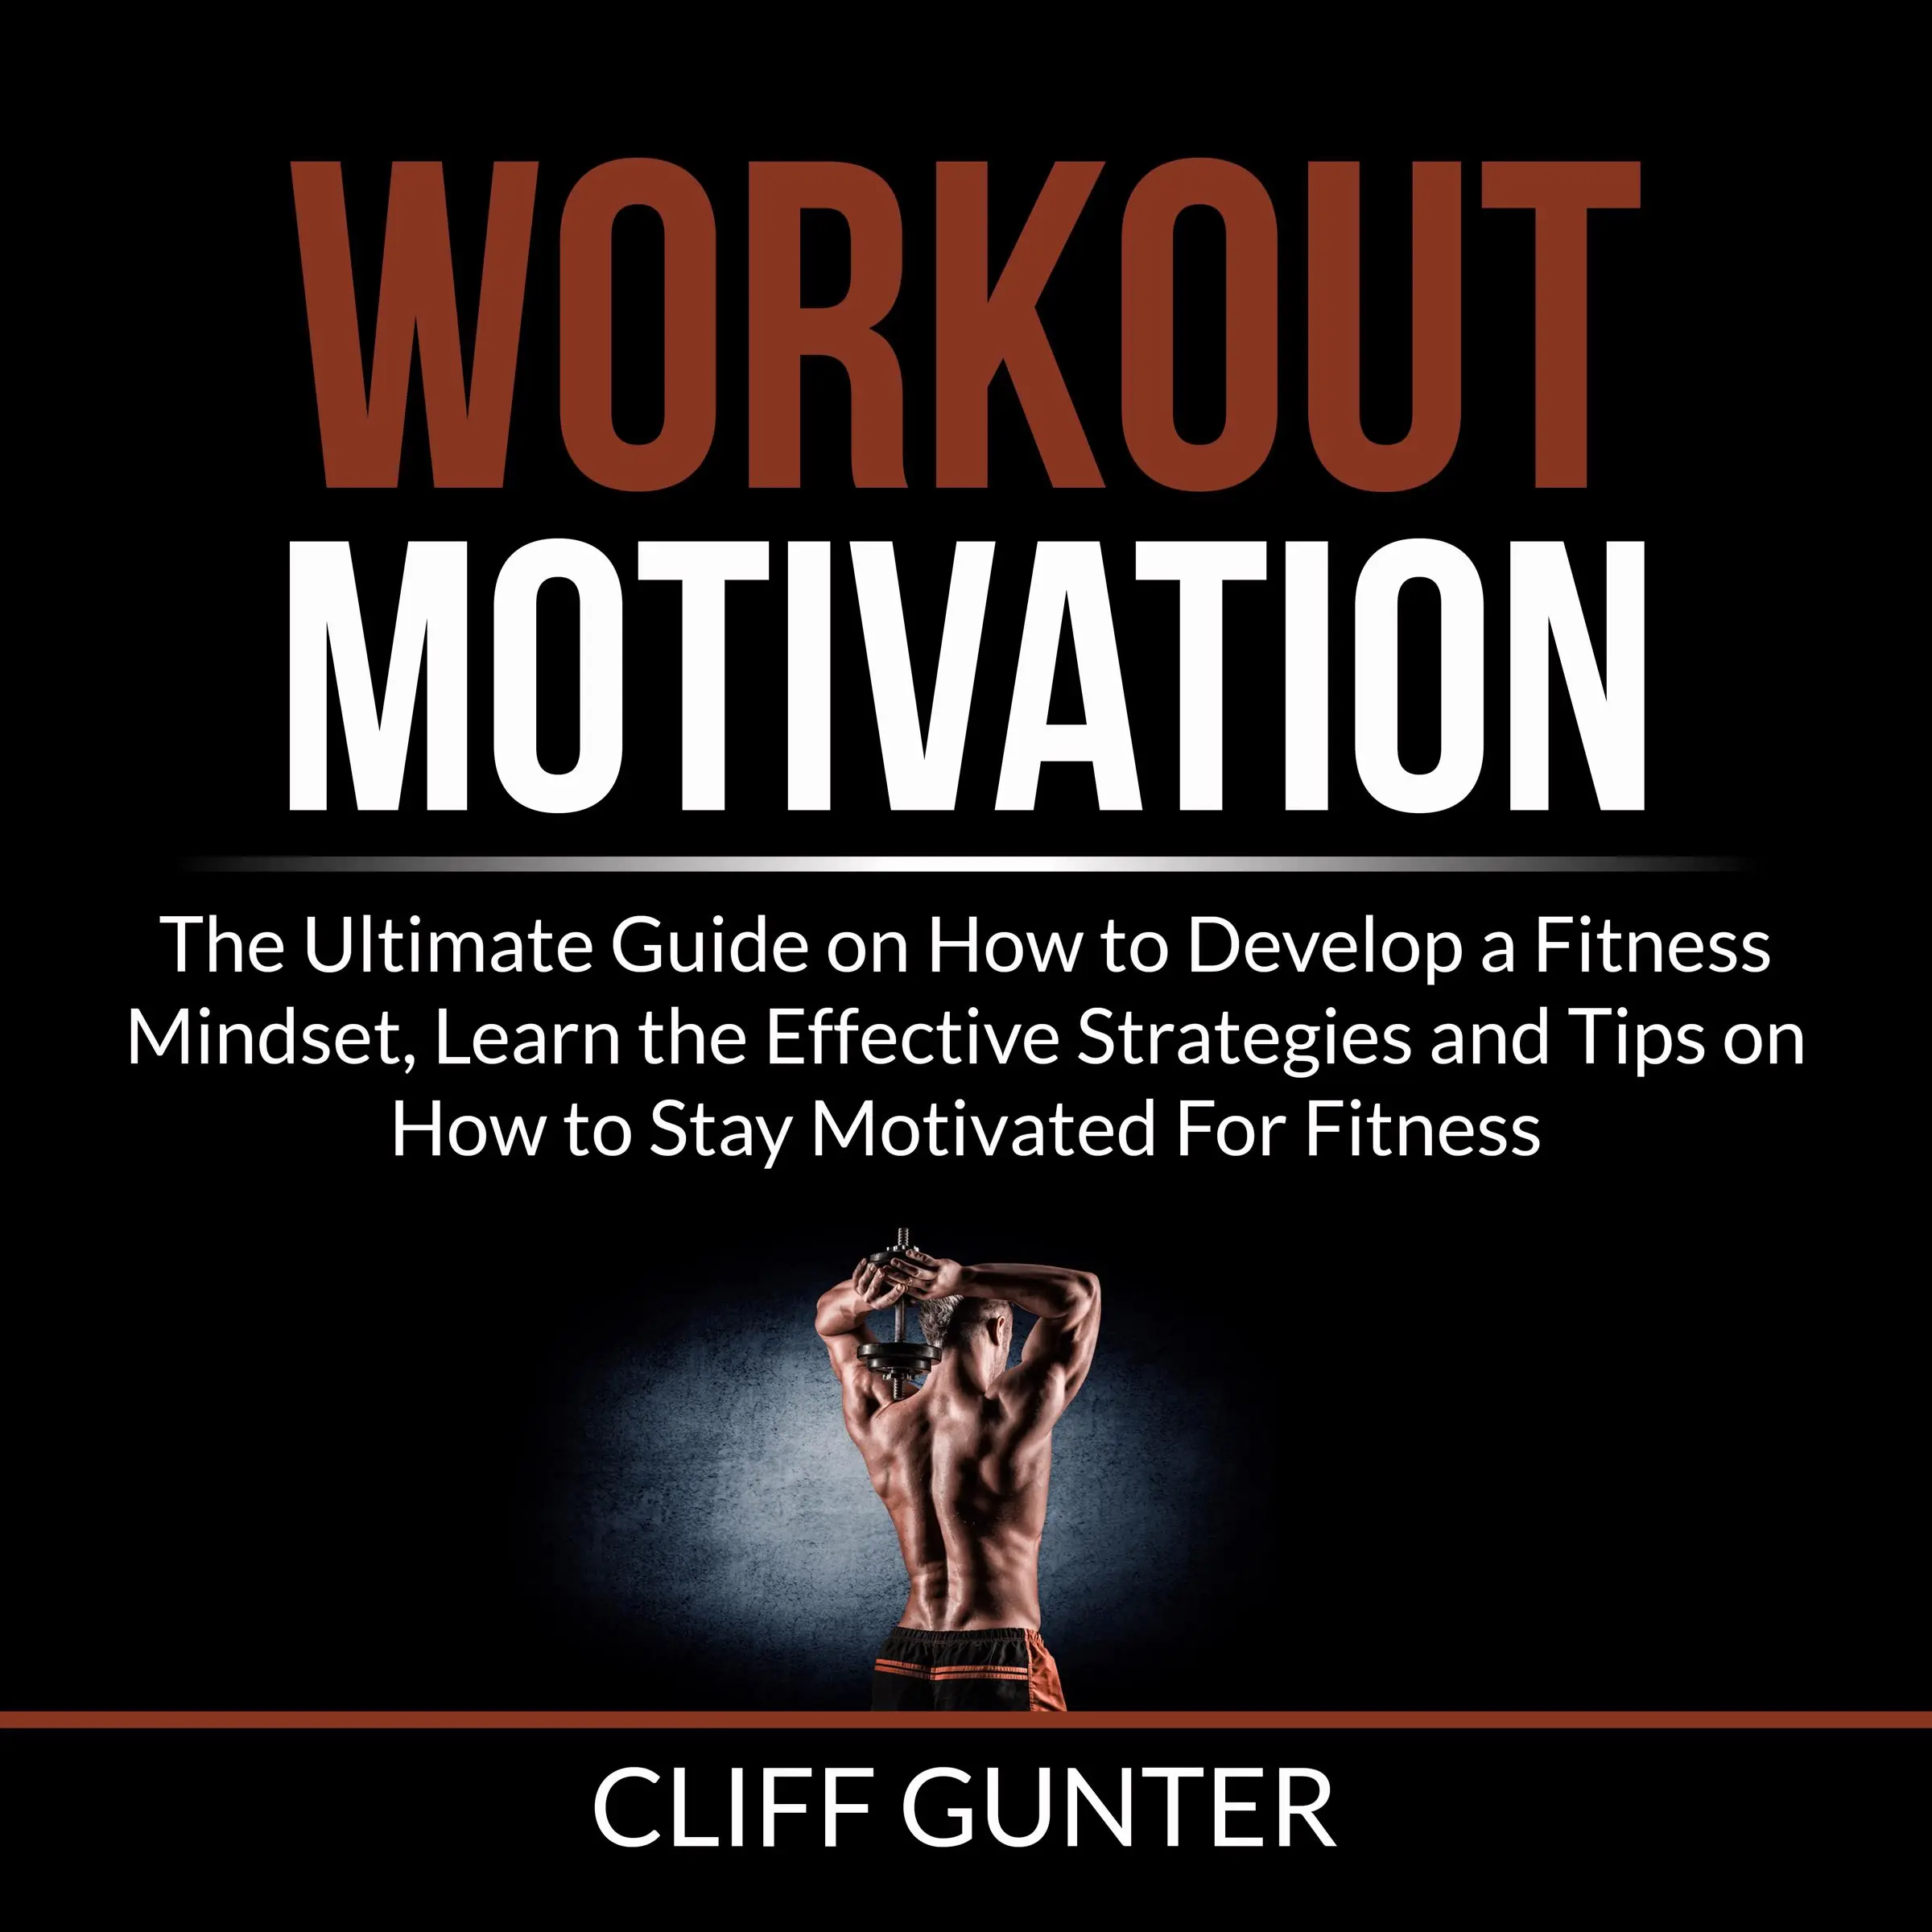 Workout Motivation: The Ultimate Guide on How to Develop a Fitness Mindset, Learn the Effective Strategies and Tips on How to Stay Motivated For Fitness by Cliff Gunter Audiobook